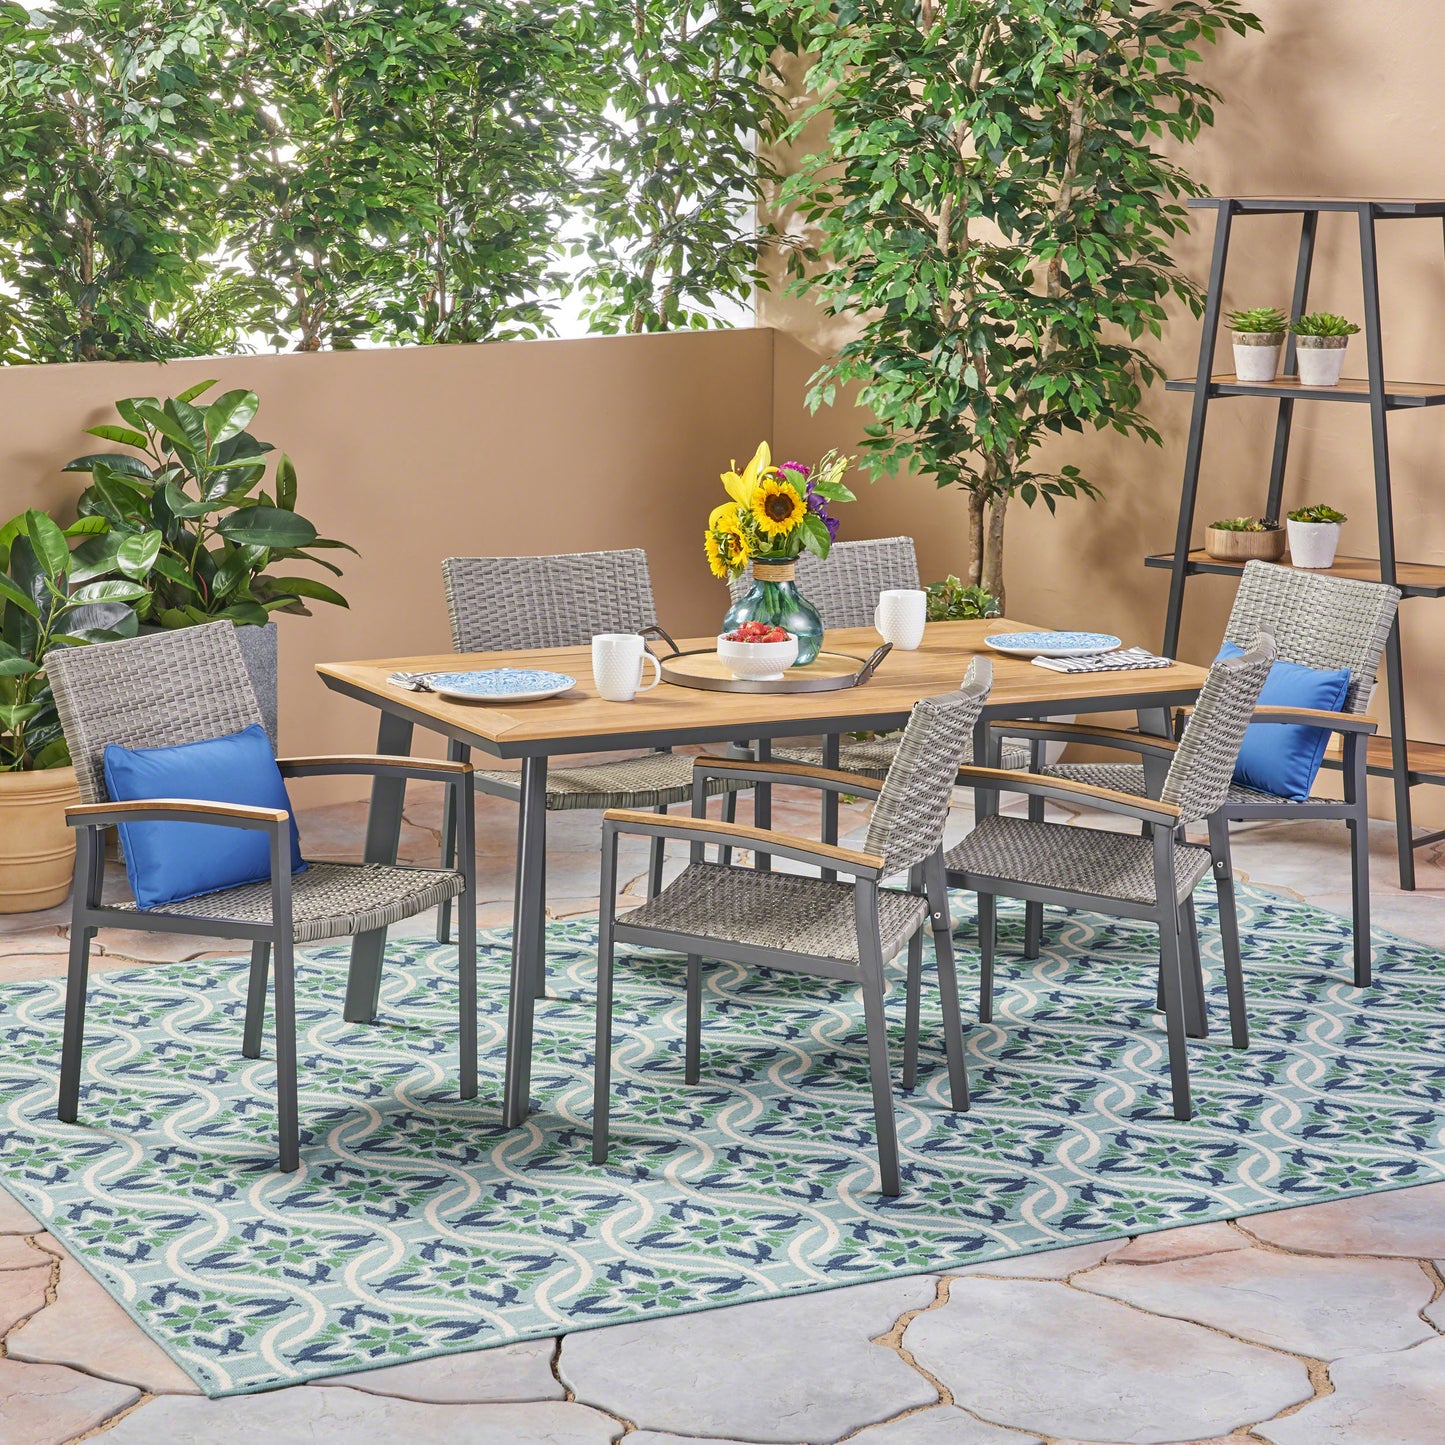 Simon Outdoor 7 Piece Aluminum and Mesh Dining Set with Wood Top